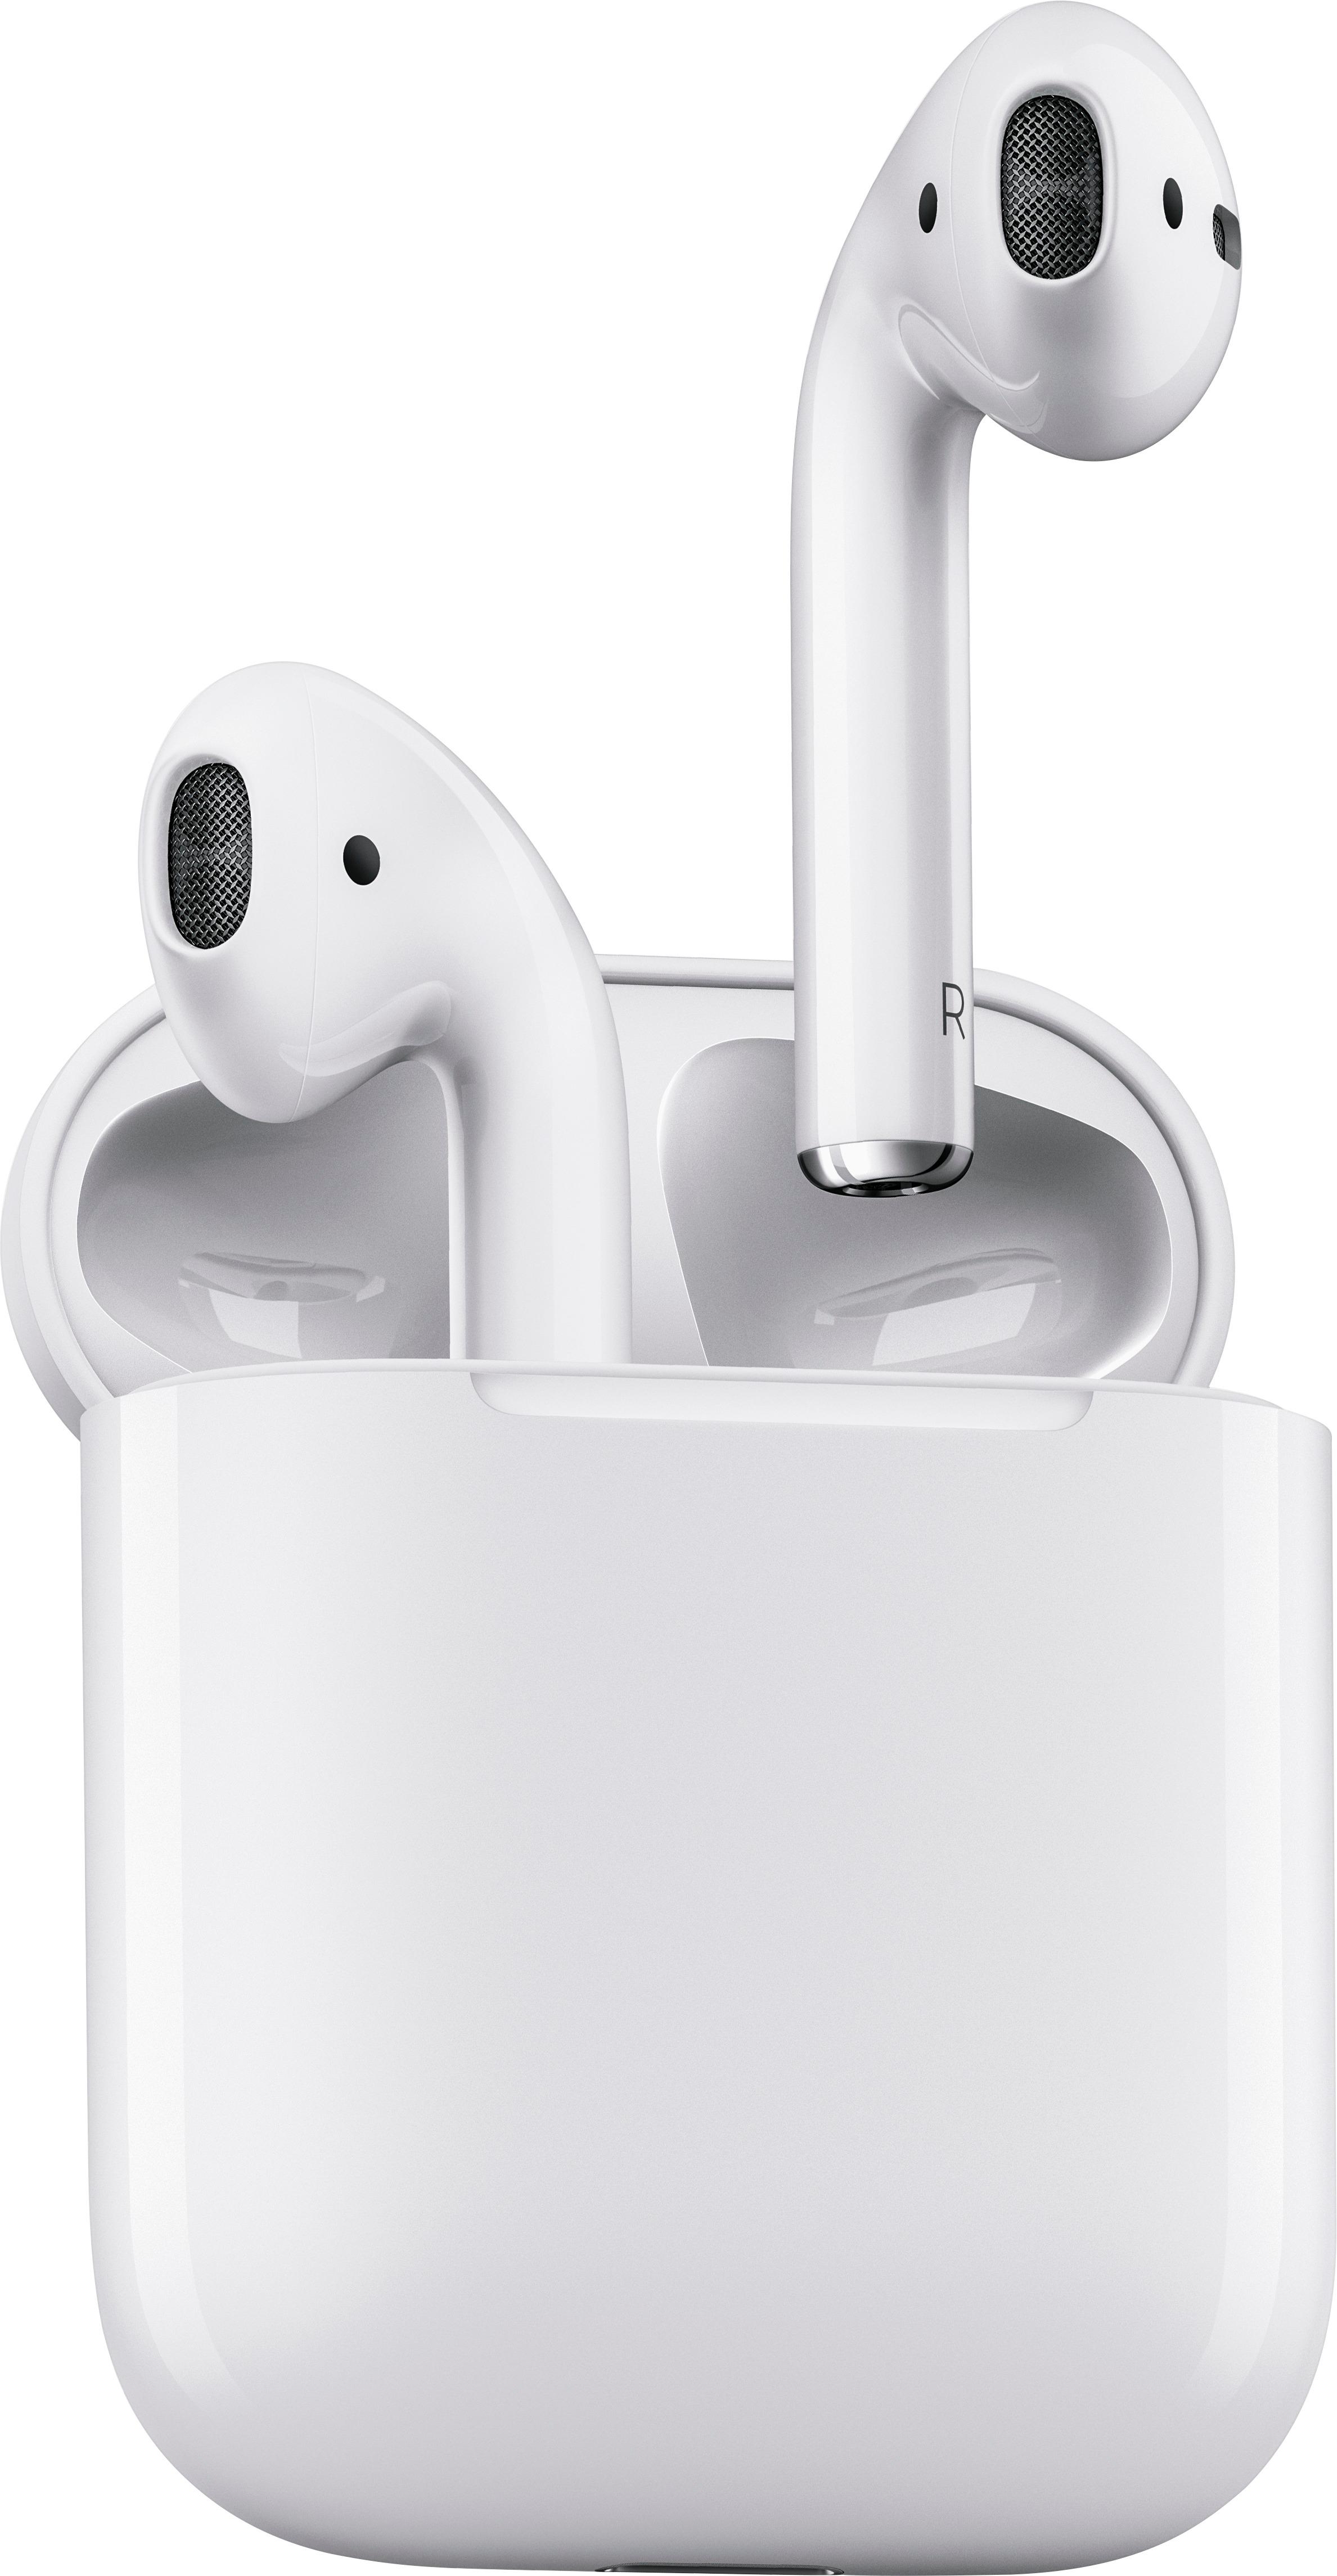 Apple - Geek Squad Certified Refurbished AirPods with Charging Case (1st Generation) - White